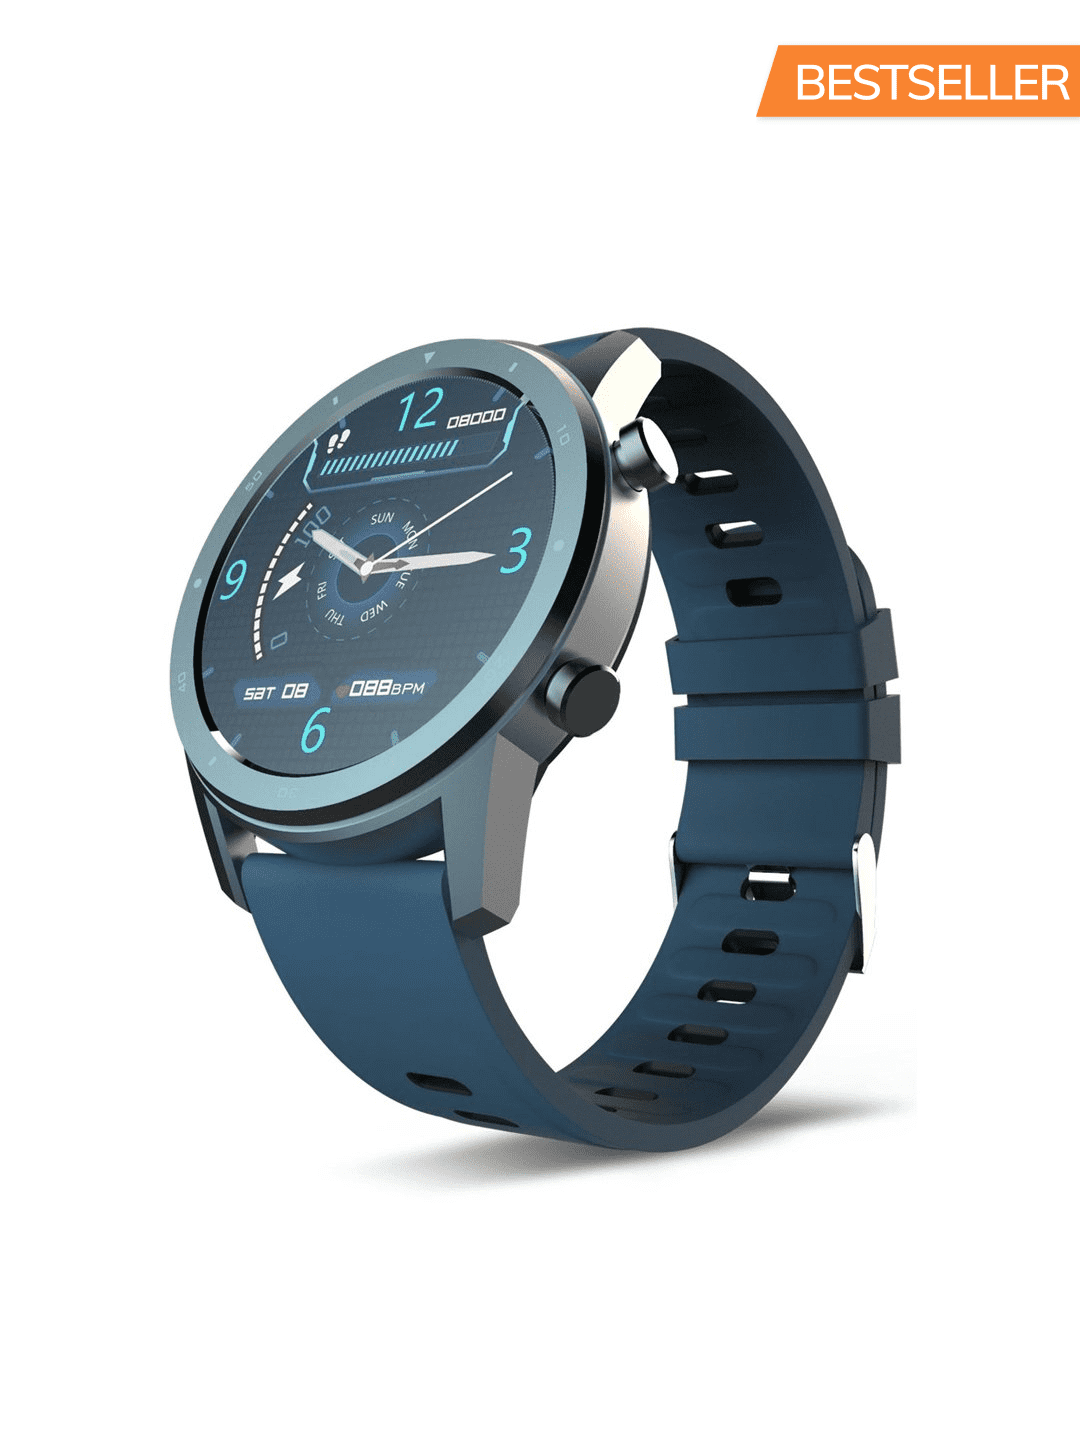 Sense a Dynamic Round Dial Smartwatch with 24 Sports Mode